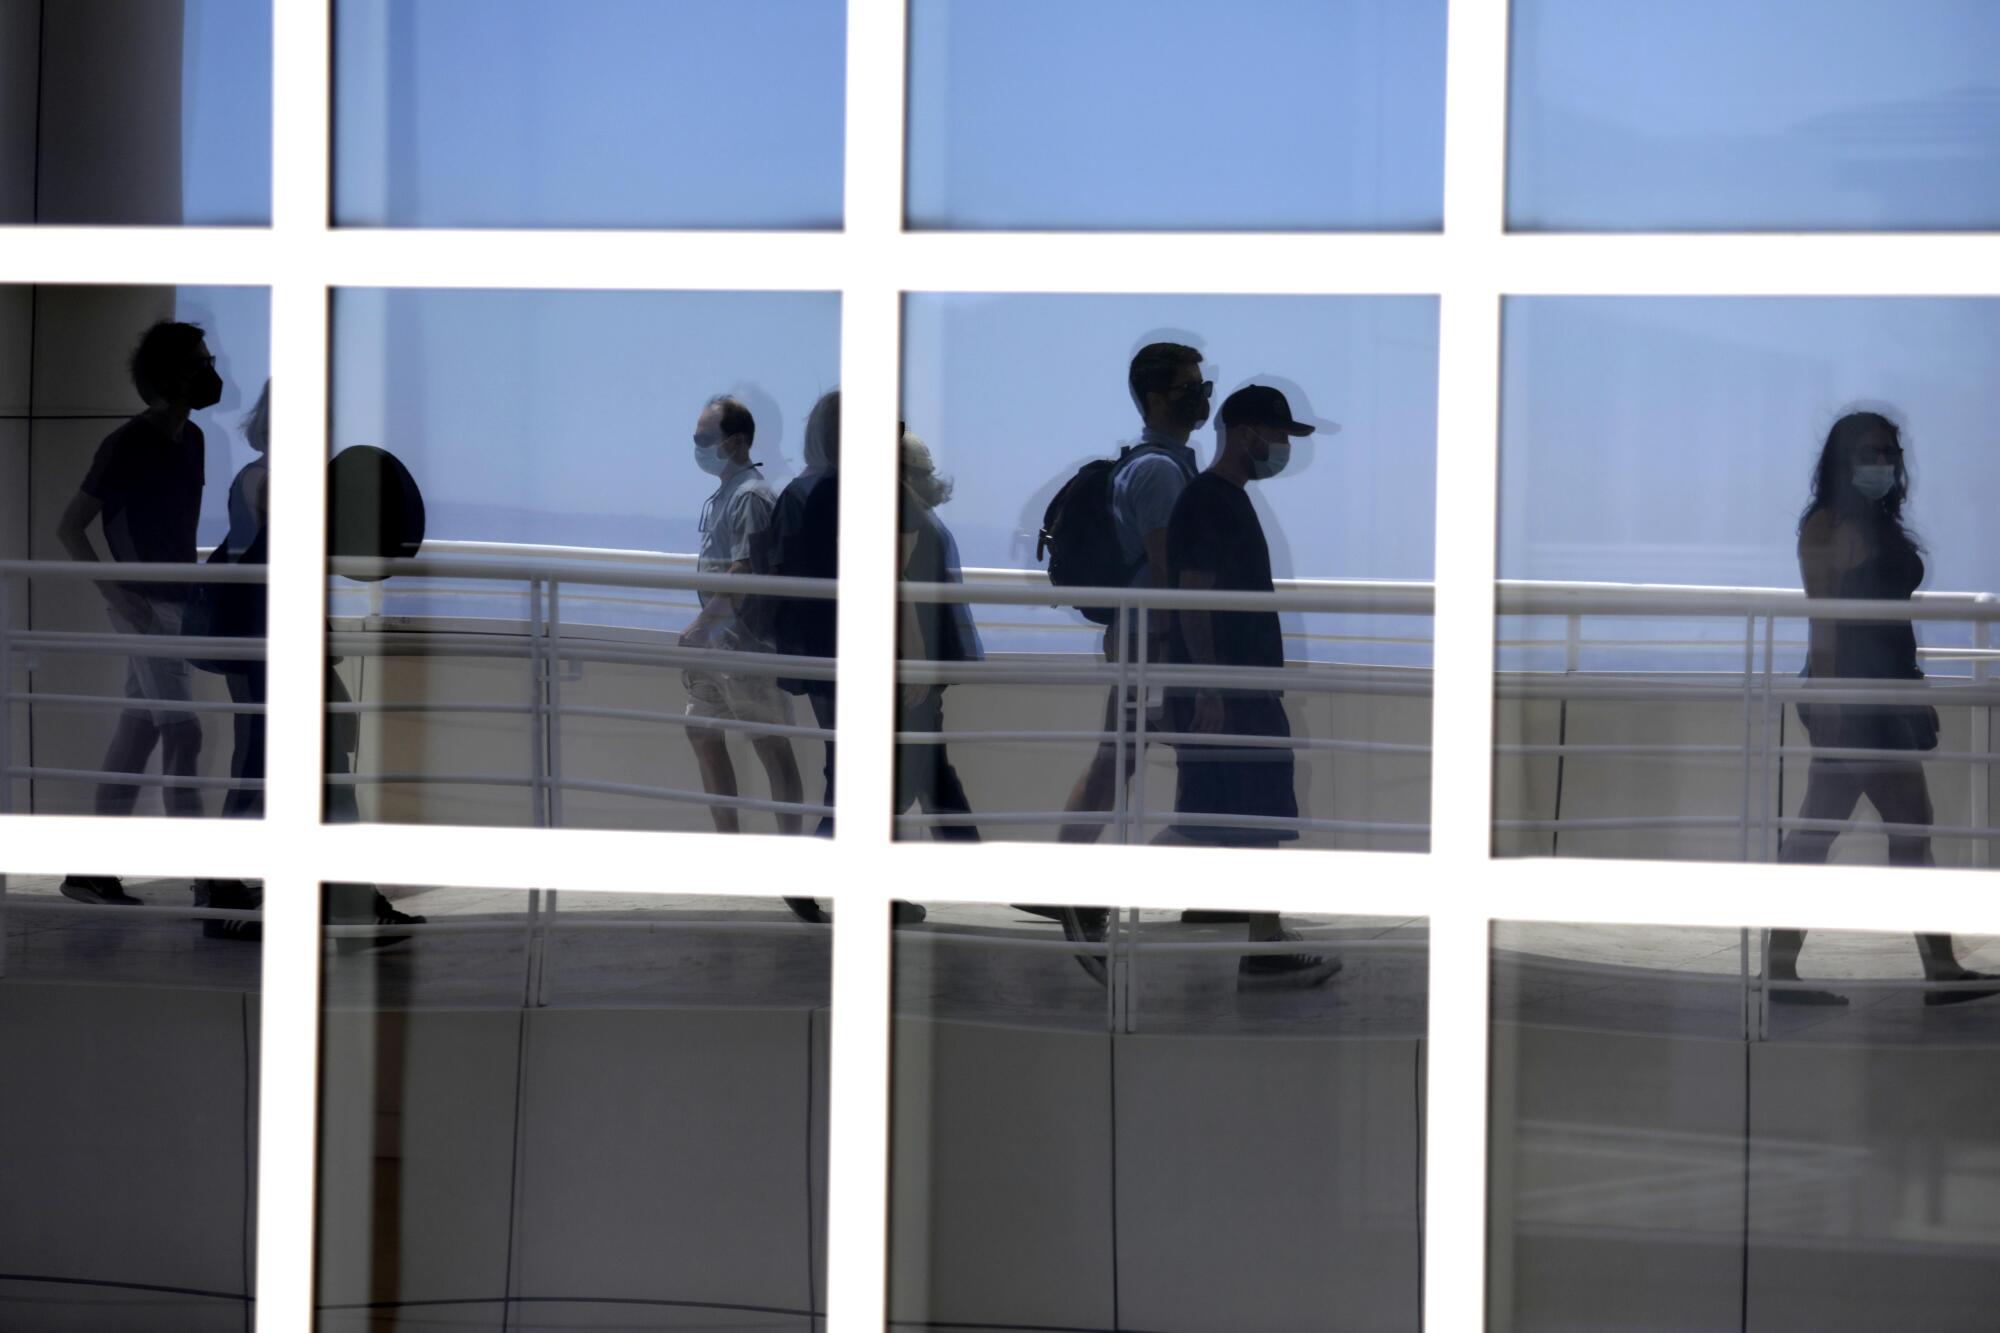 Visitors walking through the Getty Center are reflected in the panes of a window